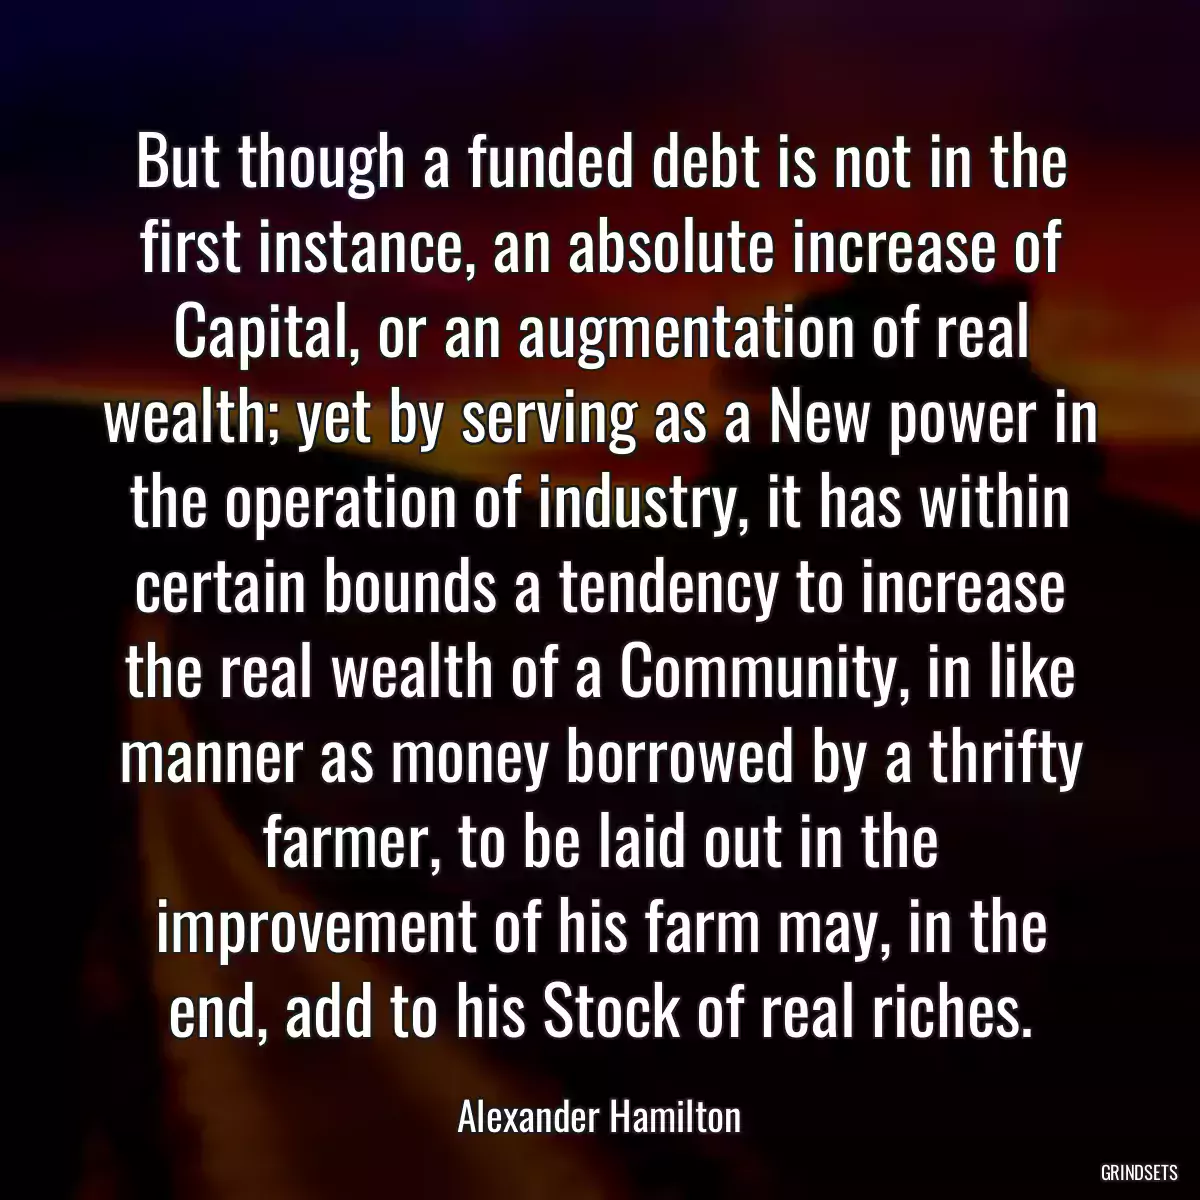 But though a funded debt is not in the first instance, an absolute increase of Capital, or an augmentation of real wealth; yet by serving as a New power in the operation of industry, it has within certain bounds a tendency to increase the real wealth of a Community, in like manner as money borrowed by a thrifty farmer, to be laid out in the improvement of his farm may, in the end, add to his Stock of real riches.